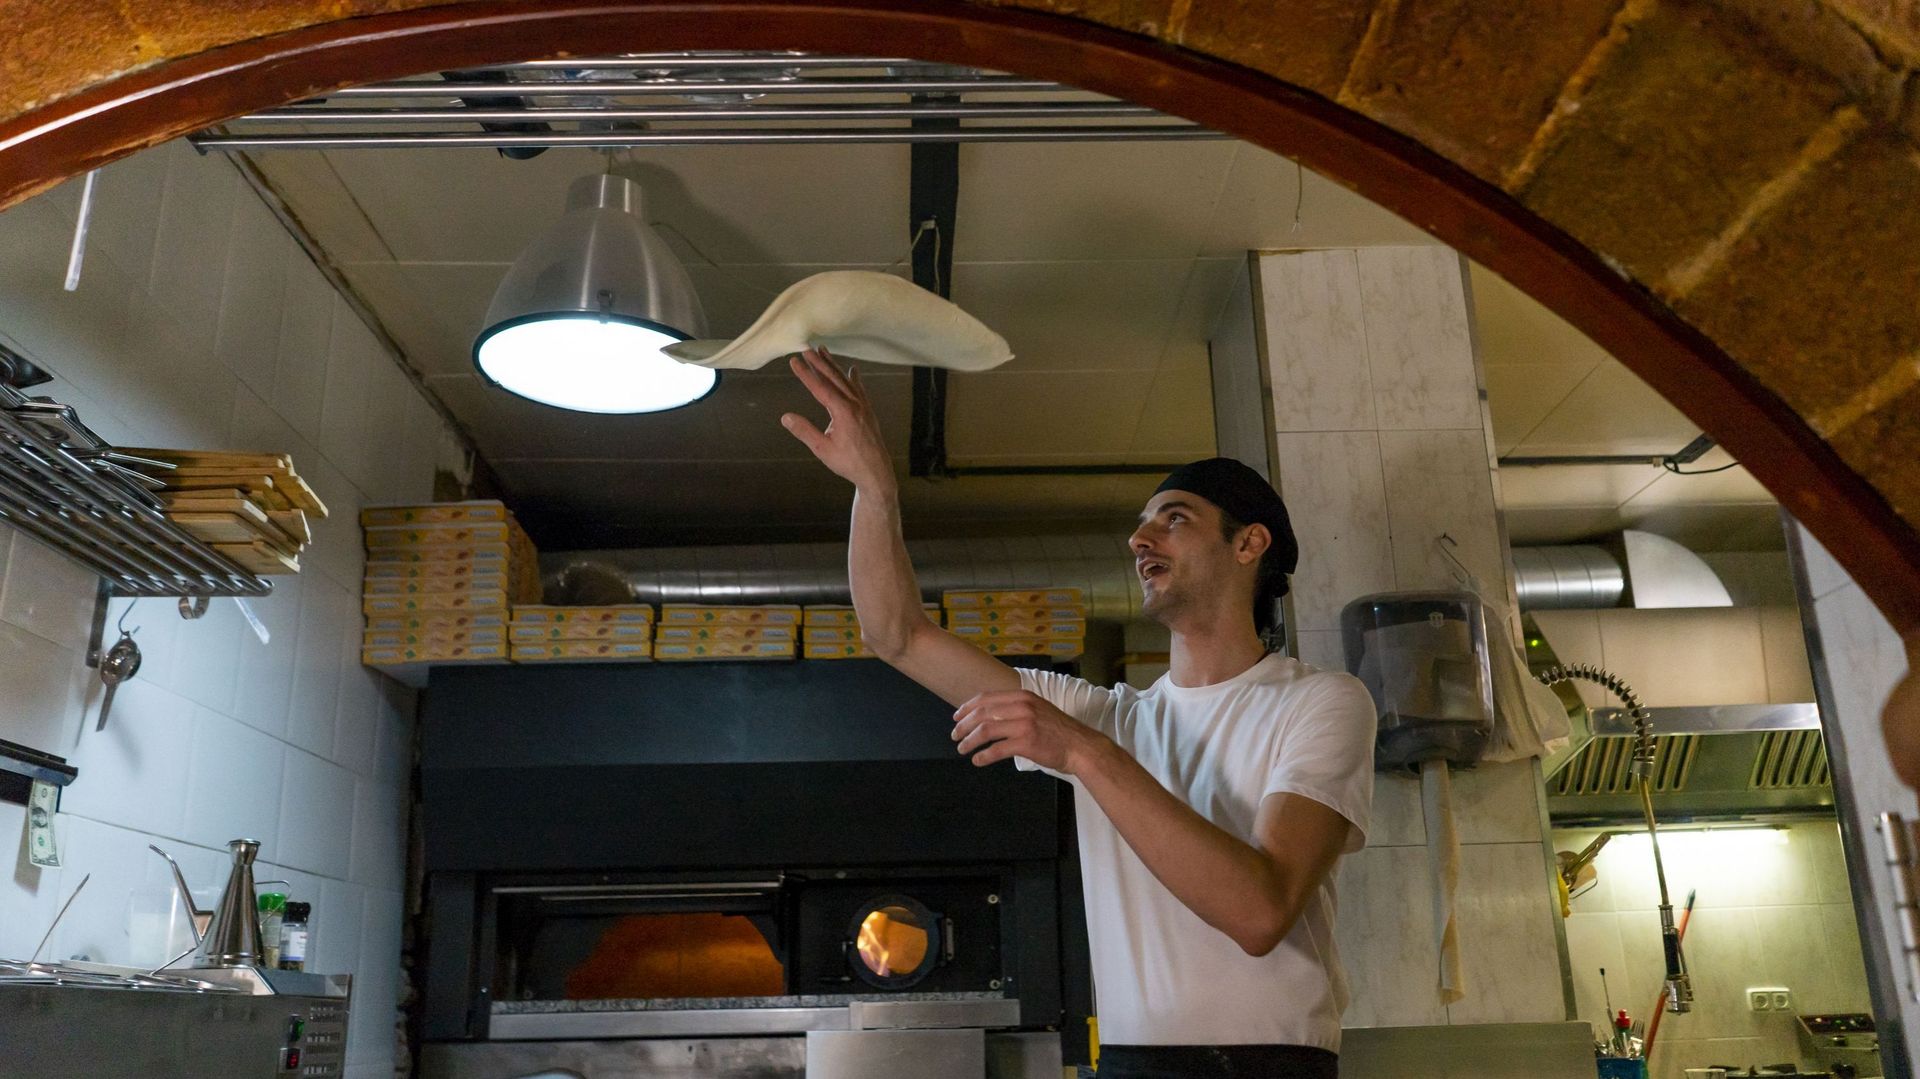 Pizza baker preparing pizza in kitchen throwing dough in the air